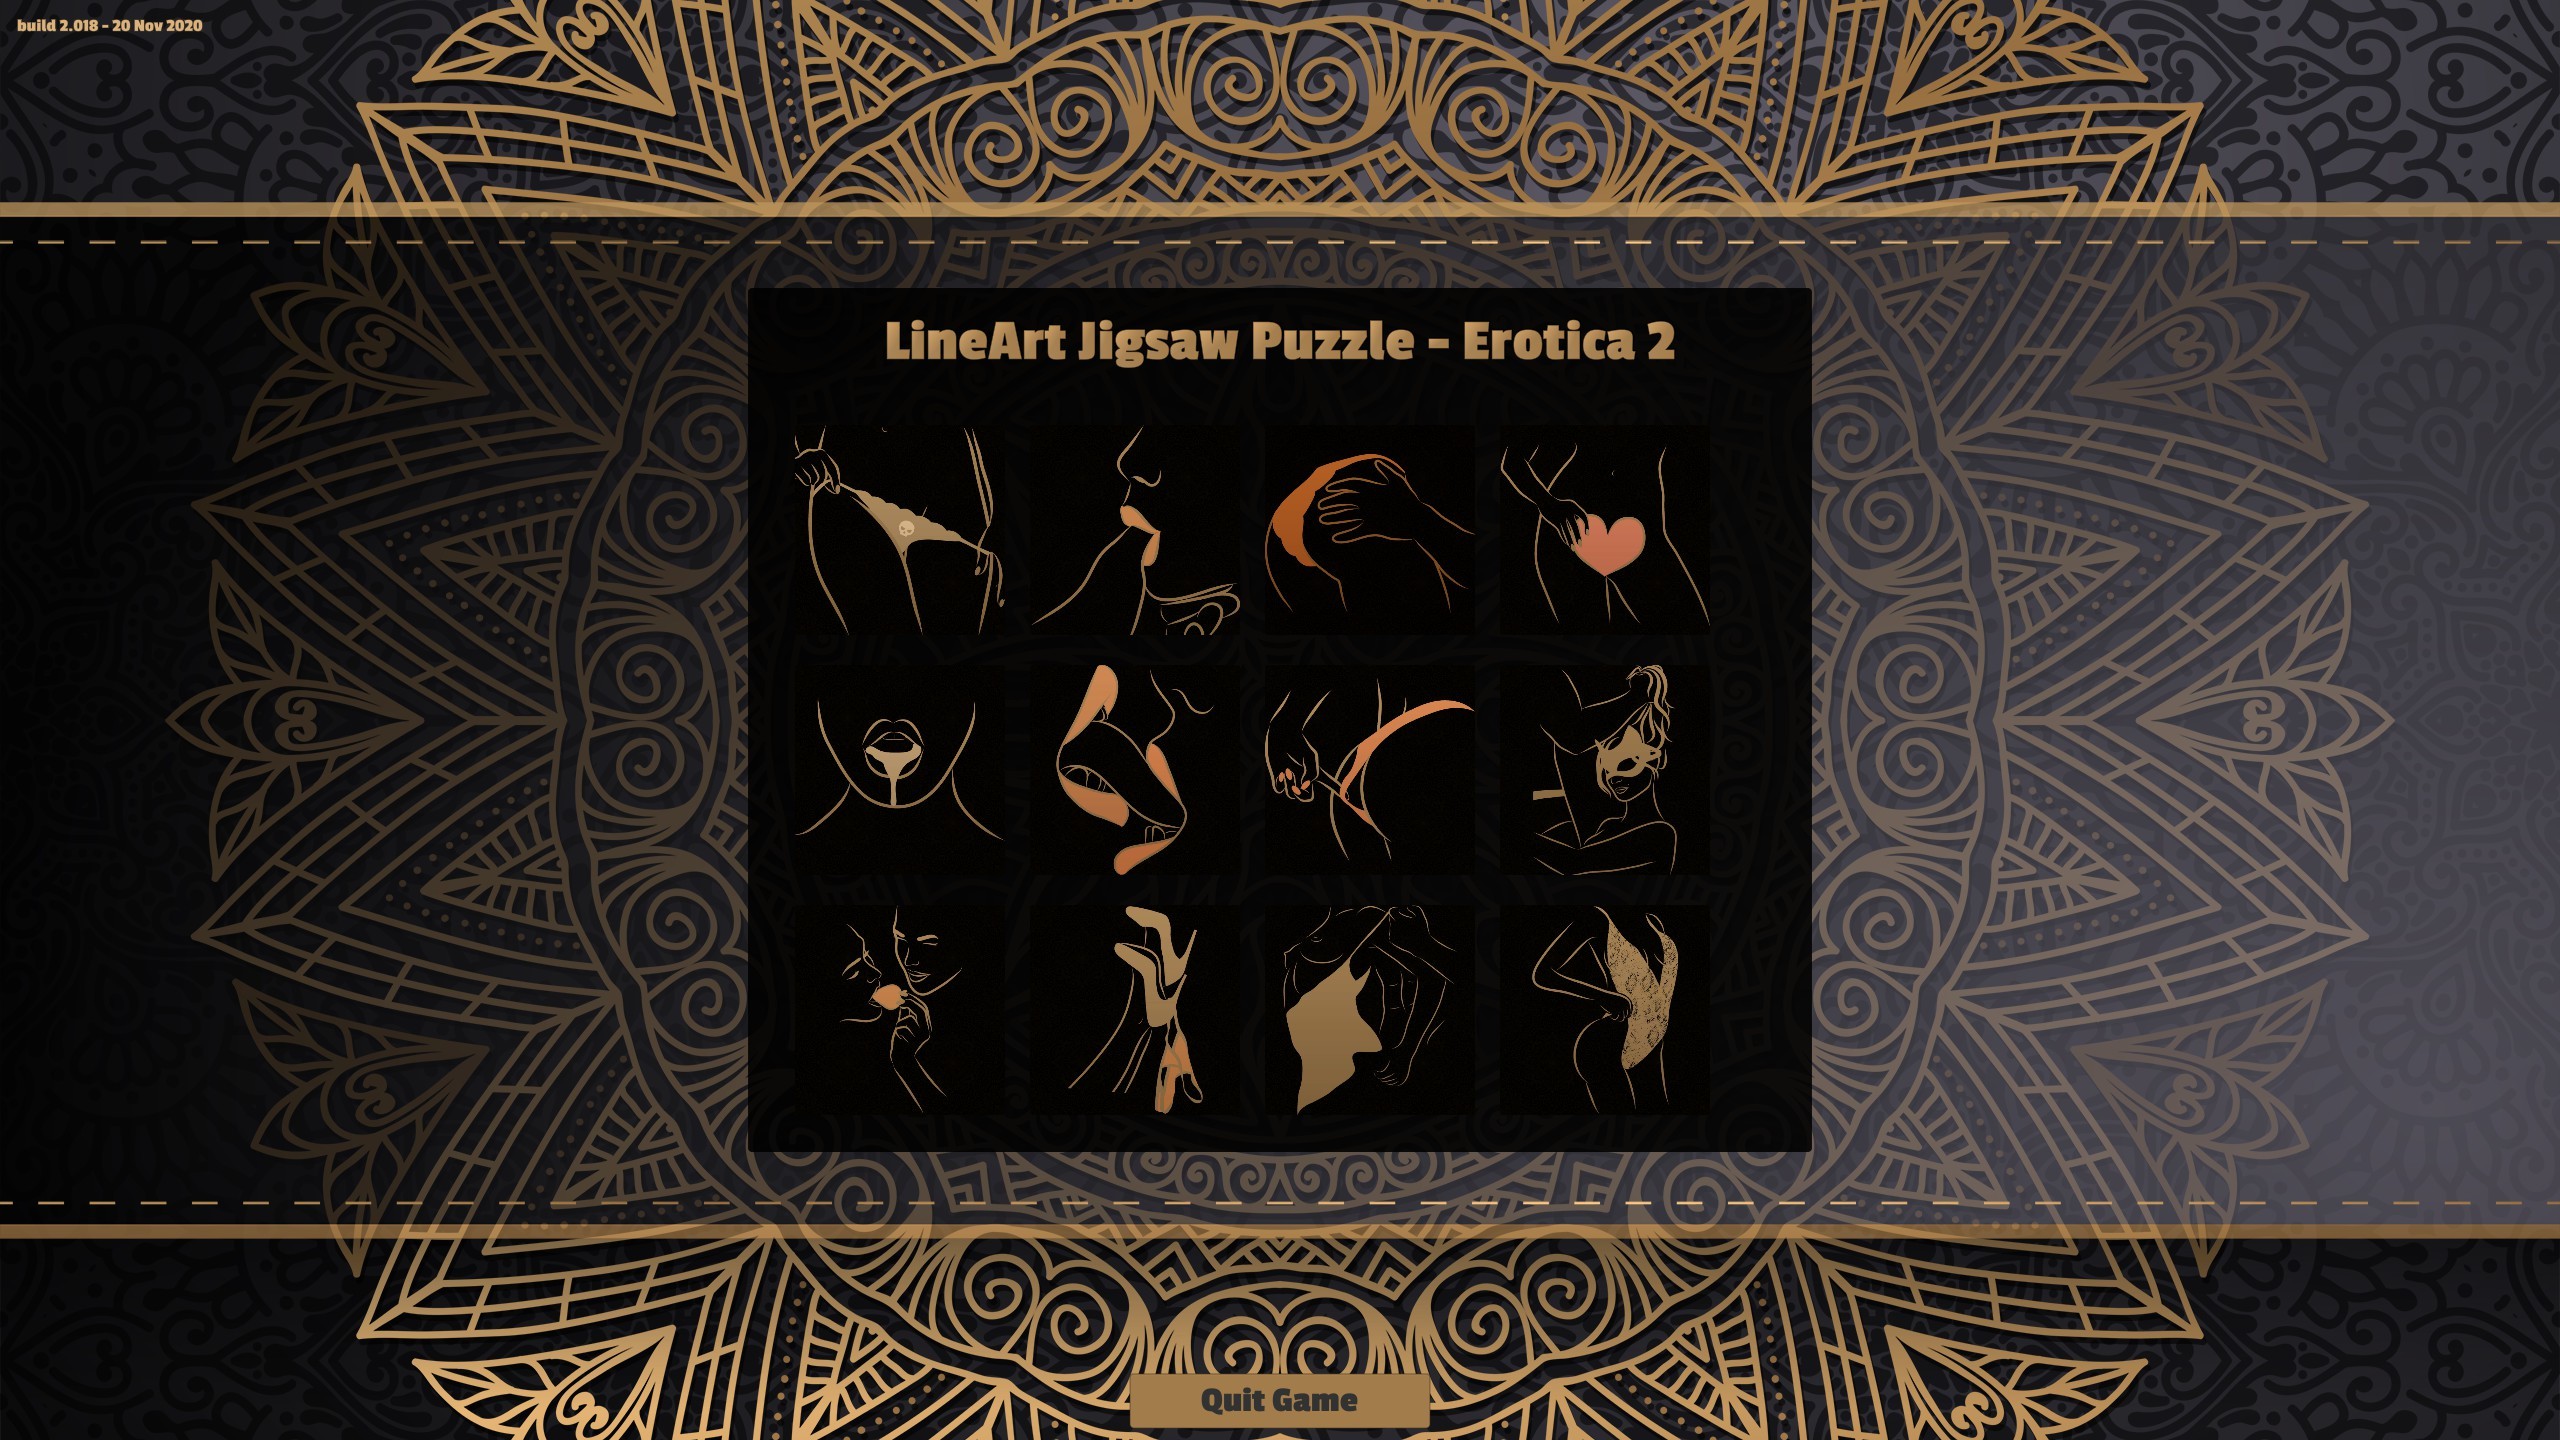 LineArt Jigsaw Puzzle - Erotica 2 Steam CD Key 0.21 $